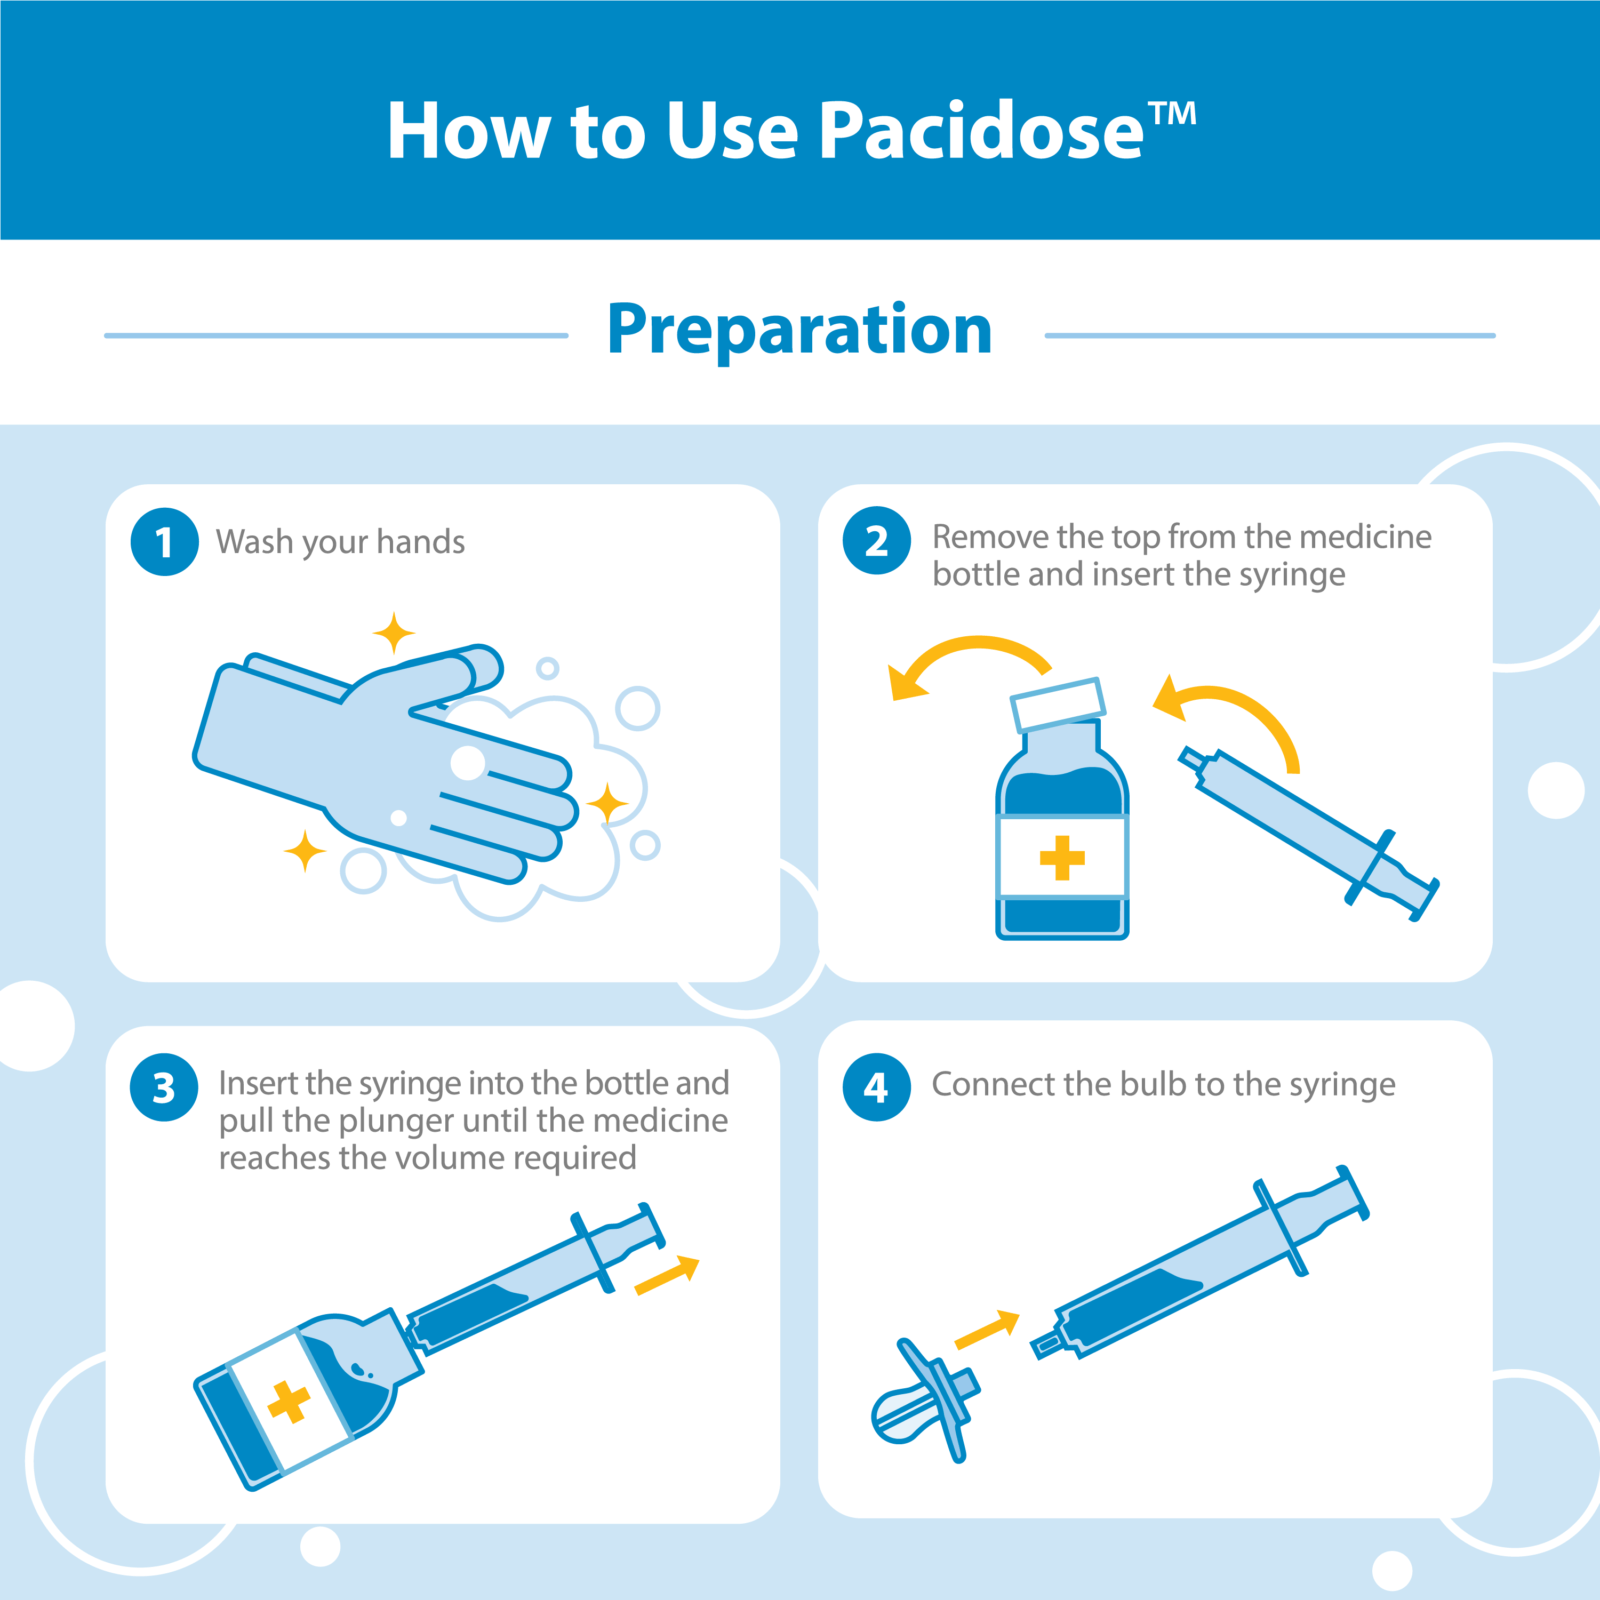 How to Use Pacidose Preparation 1. Wash your hands. 2. Remove the top from the medicine bottle and insert the syringe. 3. Insert the syringe into the bottle and pull the plunger until the medicine reaches the volume required. 4. Connect the bulb to the syringe